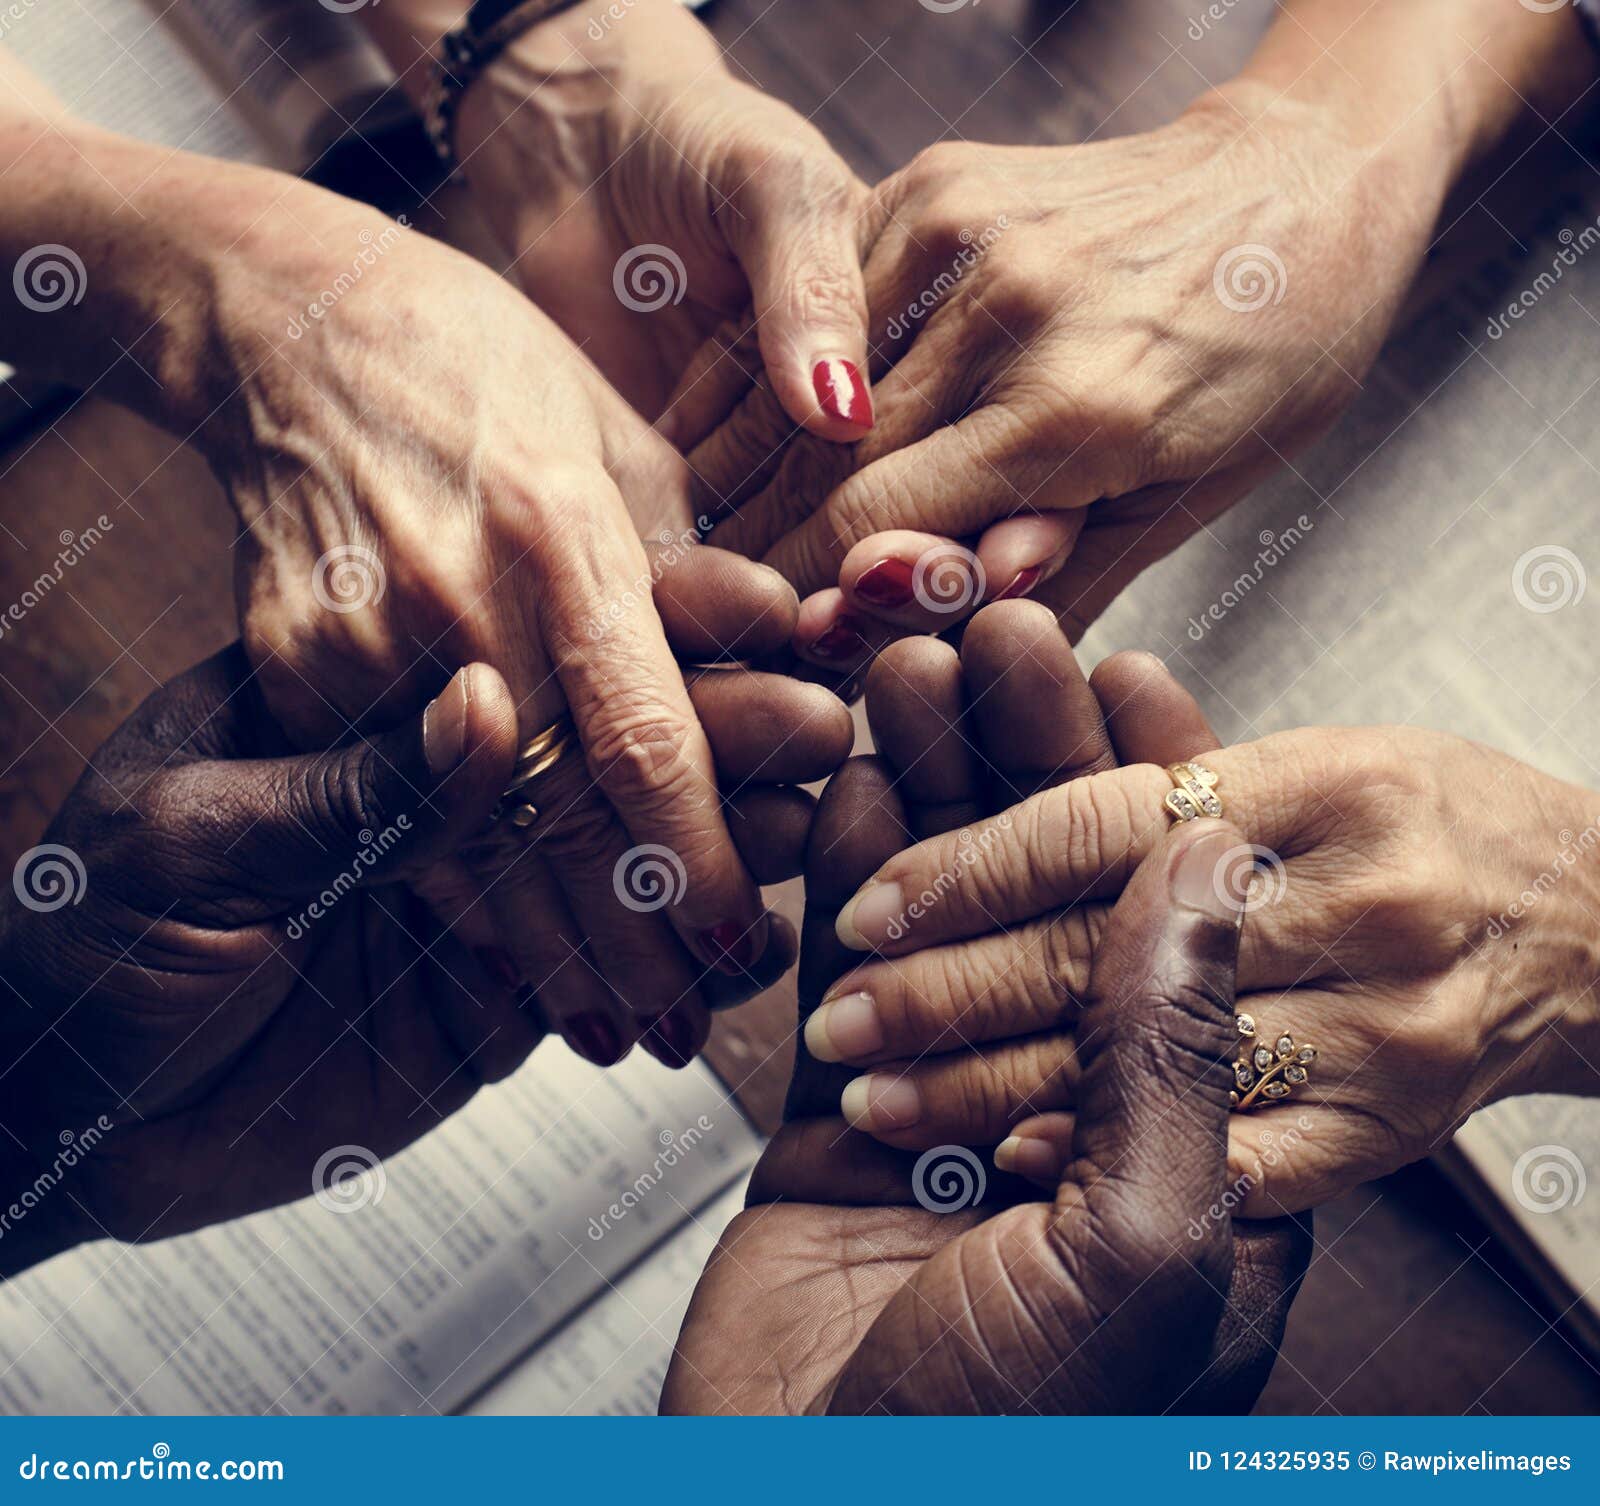 diverse people holding hands religious concept